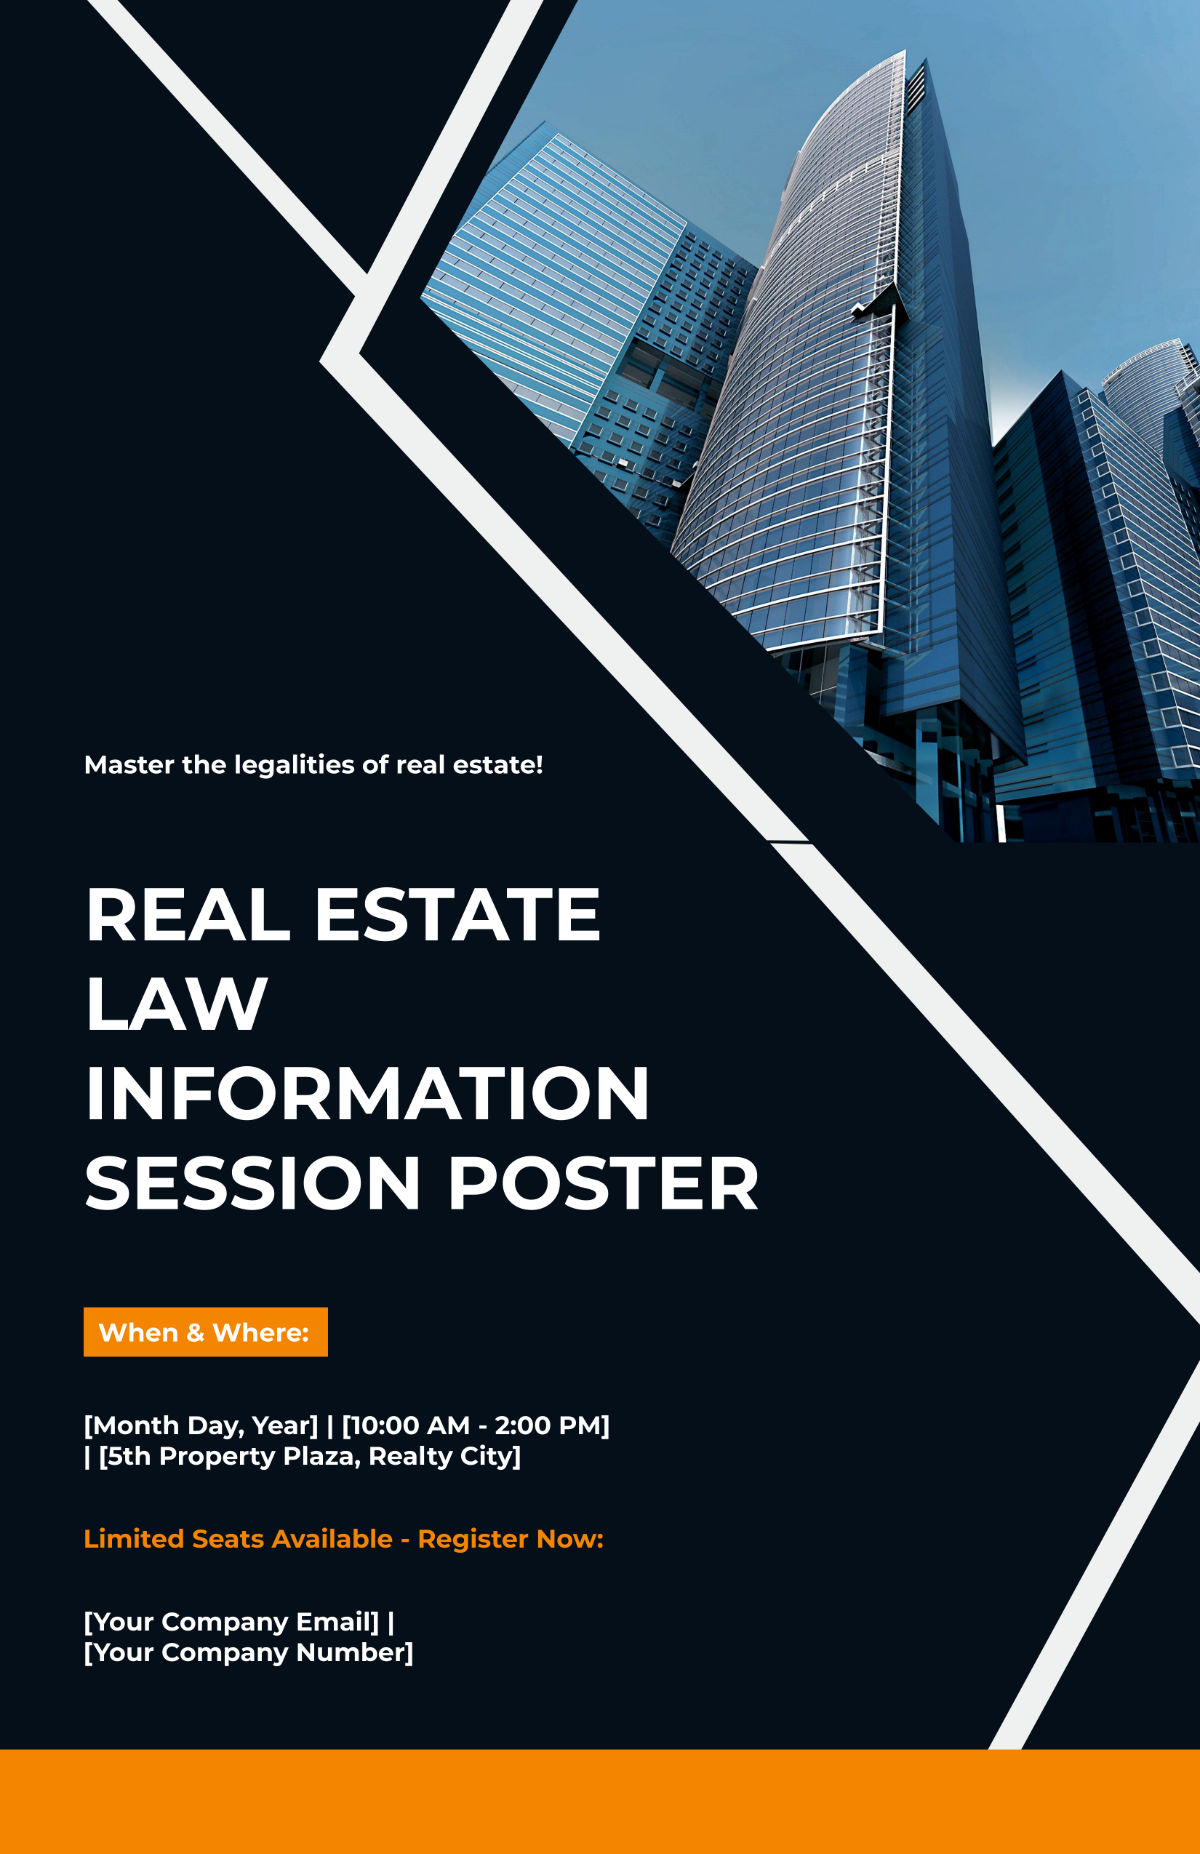 Real Estate Law Information Session Poster Template